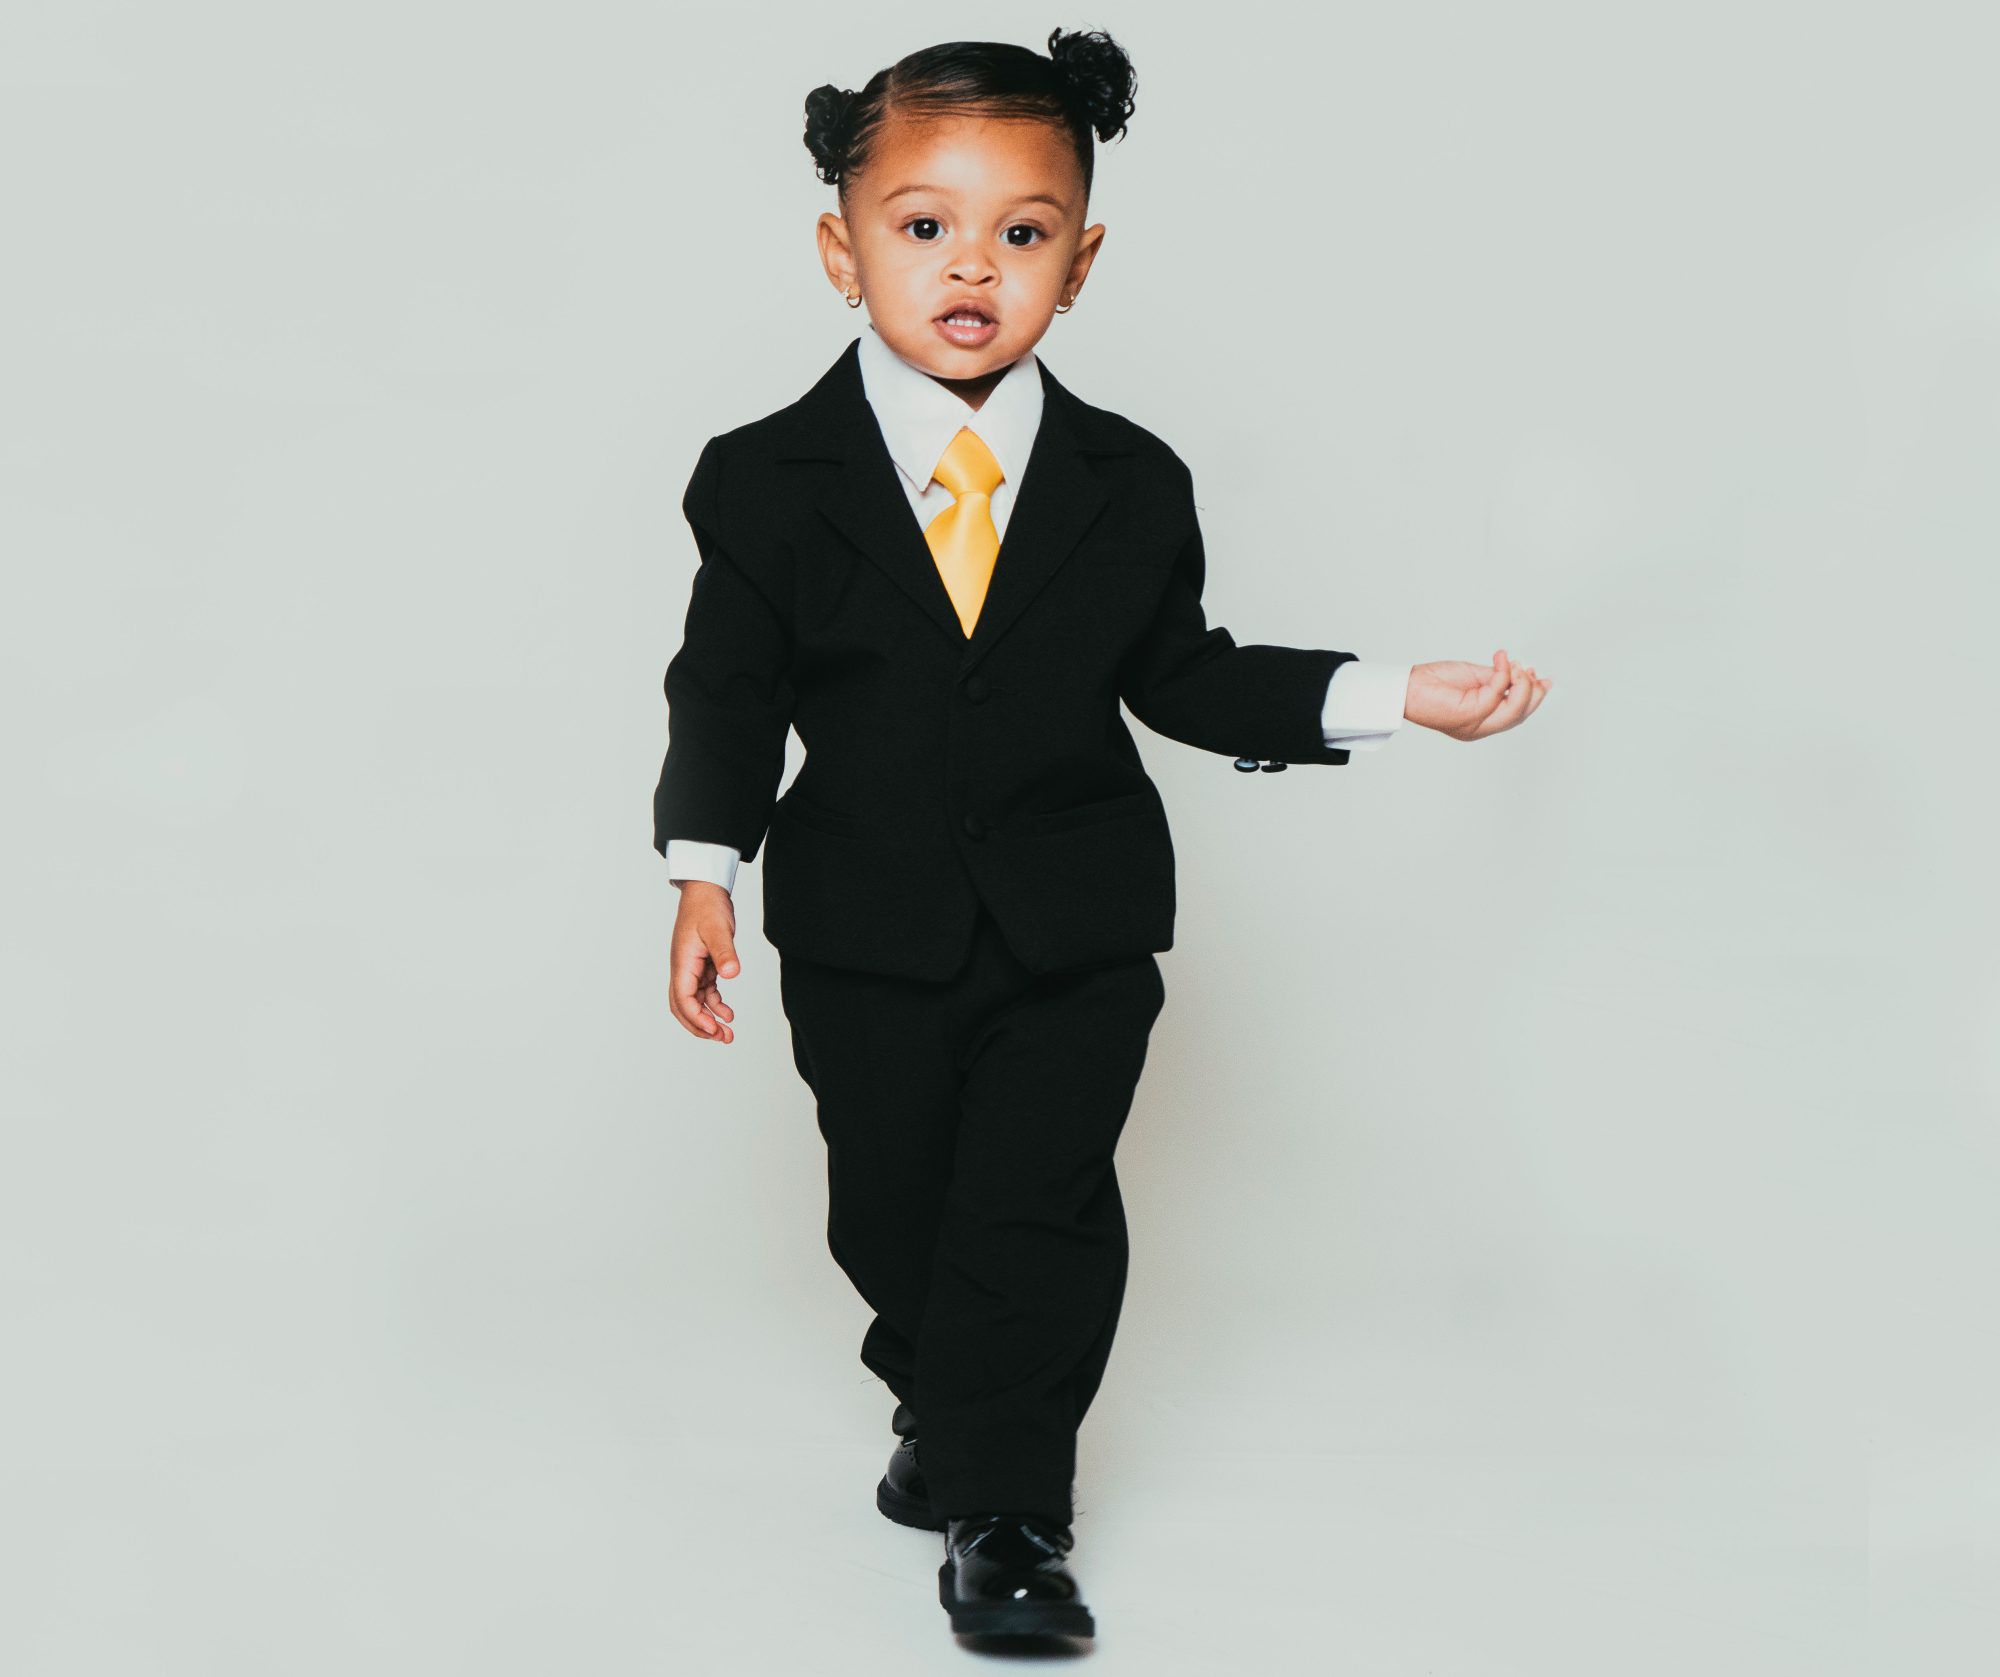 Usher Shares Photos of 'Lil Bosses' Sovereign and Sire in Suits Celebrating Their Birthdays. photo credit Bellamy Brewster